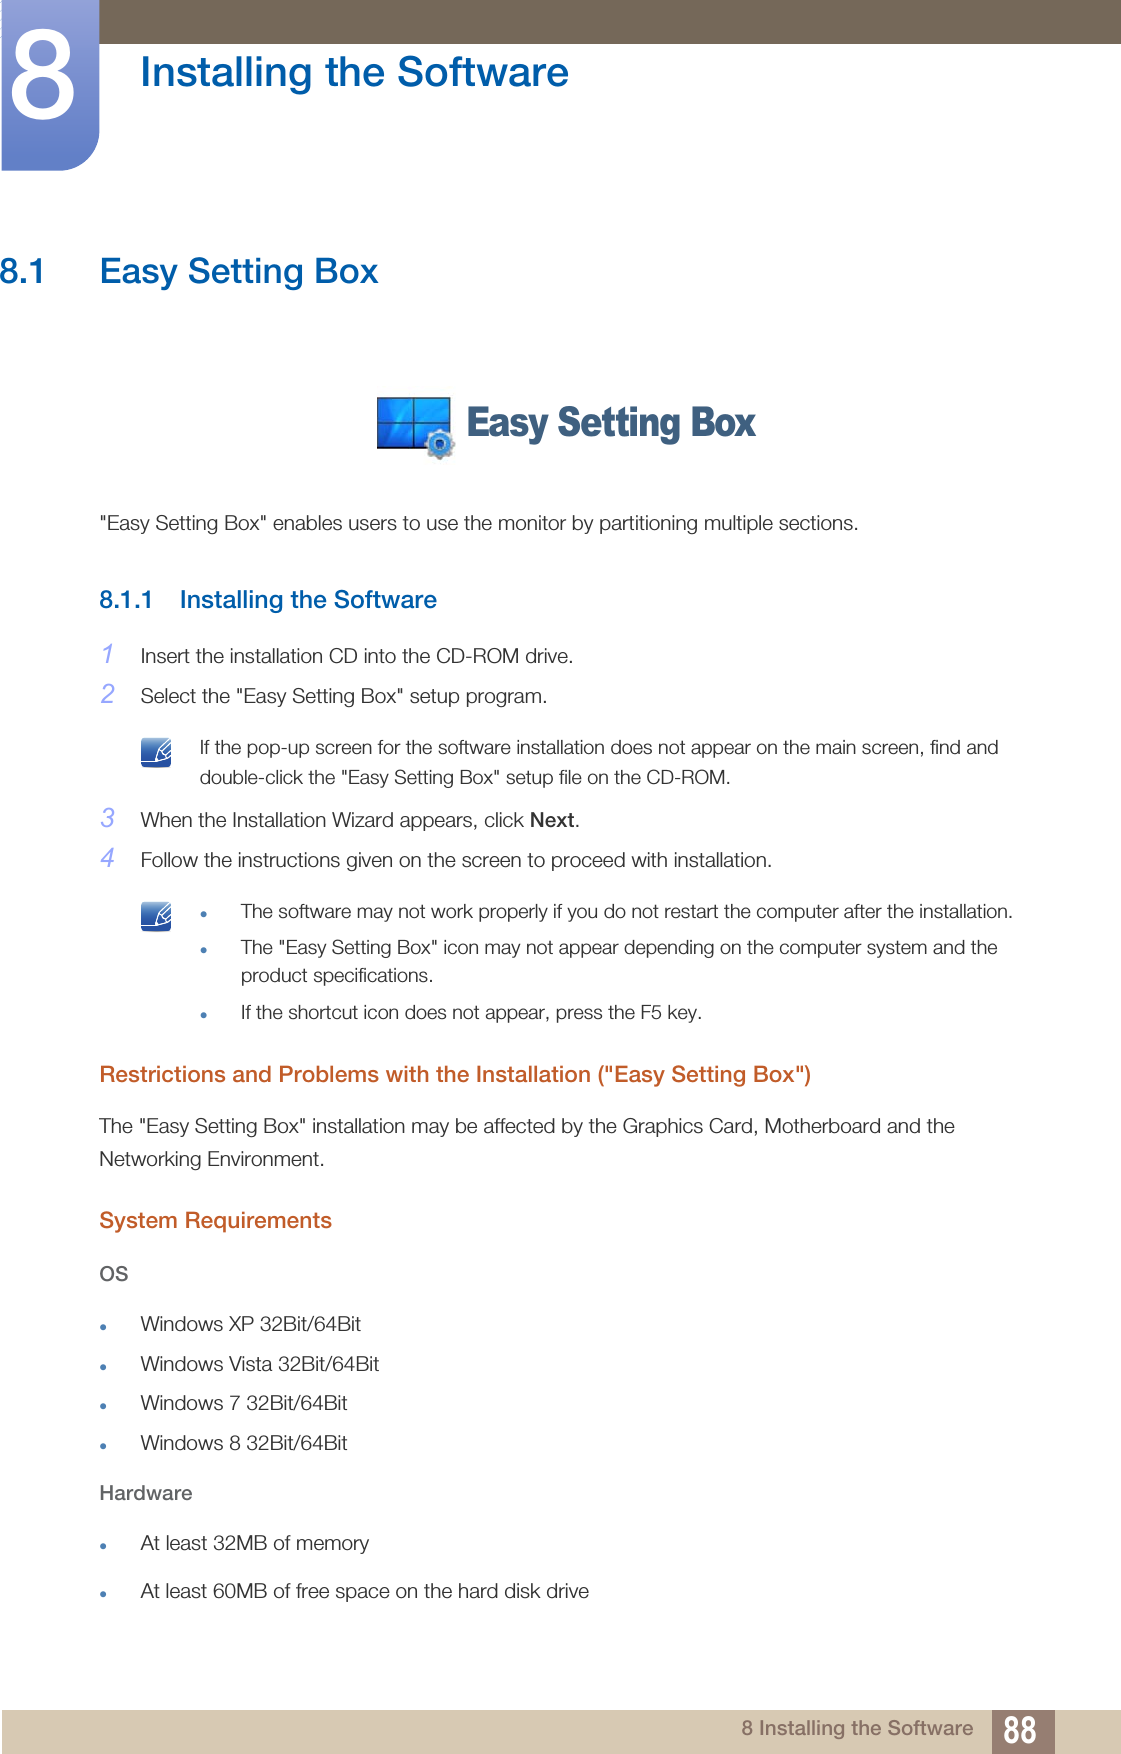 888 Installing the Software8  Installing the Software8.1 Easy Setting Box&quot;Easy Setting Box&quot; enables users to use the monitor by partitioning multiple sections.8.1.1 Installing the Software1Insert the installation CD into the CD-ROM drive.2Select the &quot;Easy Setting Box&quot; setup program. If the pop-up screen for the software installation does not appear on the main screen, find and double-click the &quot;Easy Setting Box&quot; setup file on the CD-ROM. 3When the Installation Wizard appears, click Next.4Follow the instructions given on the screen to proceed with installation. zThe software may not work properly if you do not restart the computer after the installation.zThe &quot;Easy Setting Box&quot; icon may not appear depending on the computer system and the product specifications.zIf the shortcut icon does not appear, press the F5 key. Restrictions and Problems with the Installation (&quot;Easy Setting Box&quot;)The &quot;Easy Setting Box&quot; installation may be affected by the Graphics Card, Motherboard and the Networking Environment.System RequirementsOSzWindows XP 32Bit/64BitzWindows Vista 32Bit/64BitzWindows 7 32Bit/64BitzWindows 8 32Bit/64BitHardwarezAt least 32MB of memoryzAt least 60MB of free space on the hard disk driveEasy Setting Box